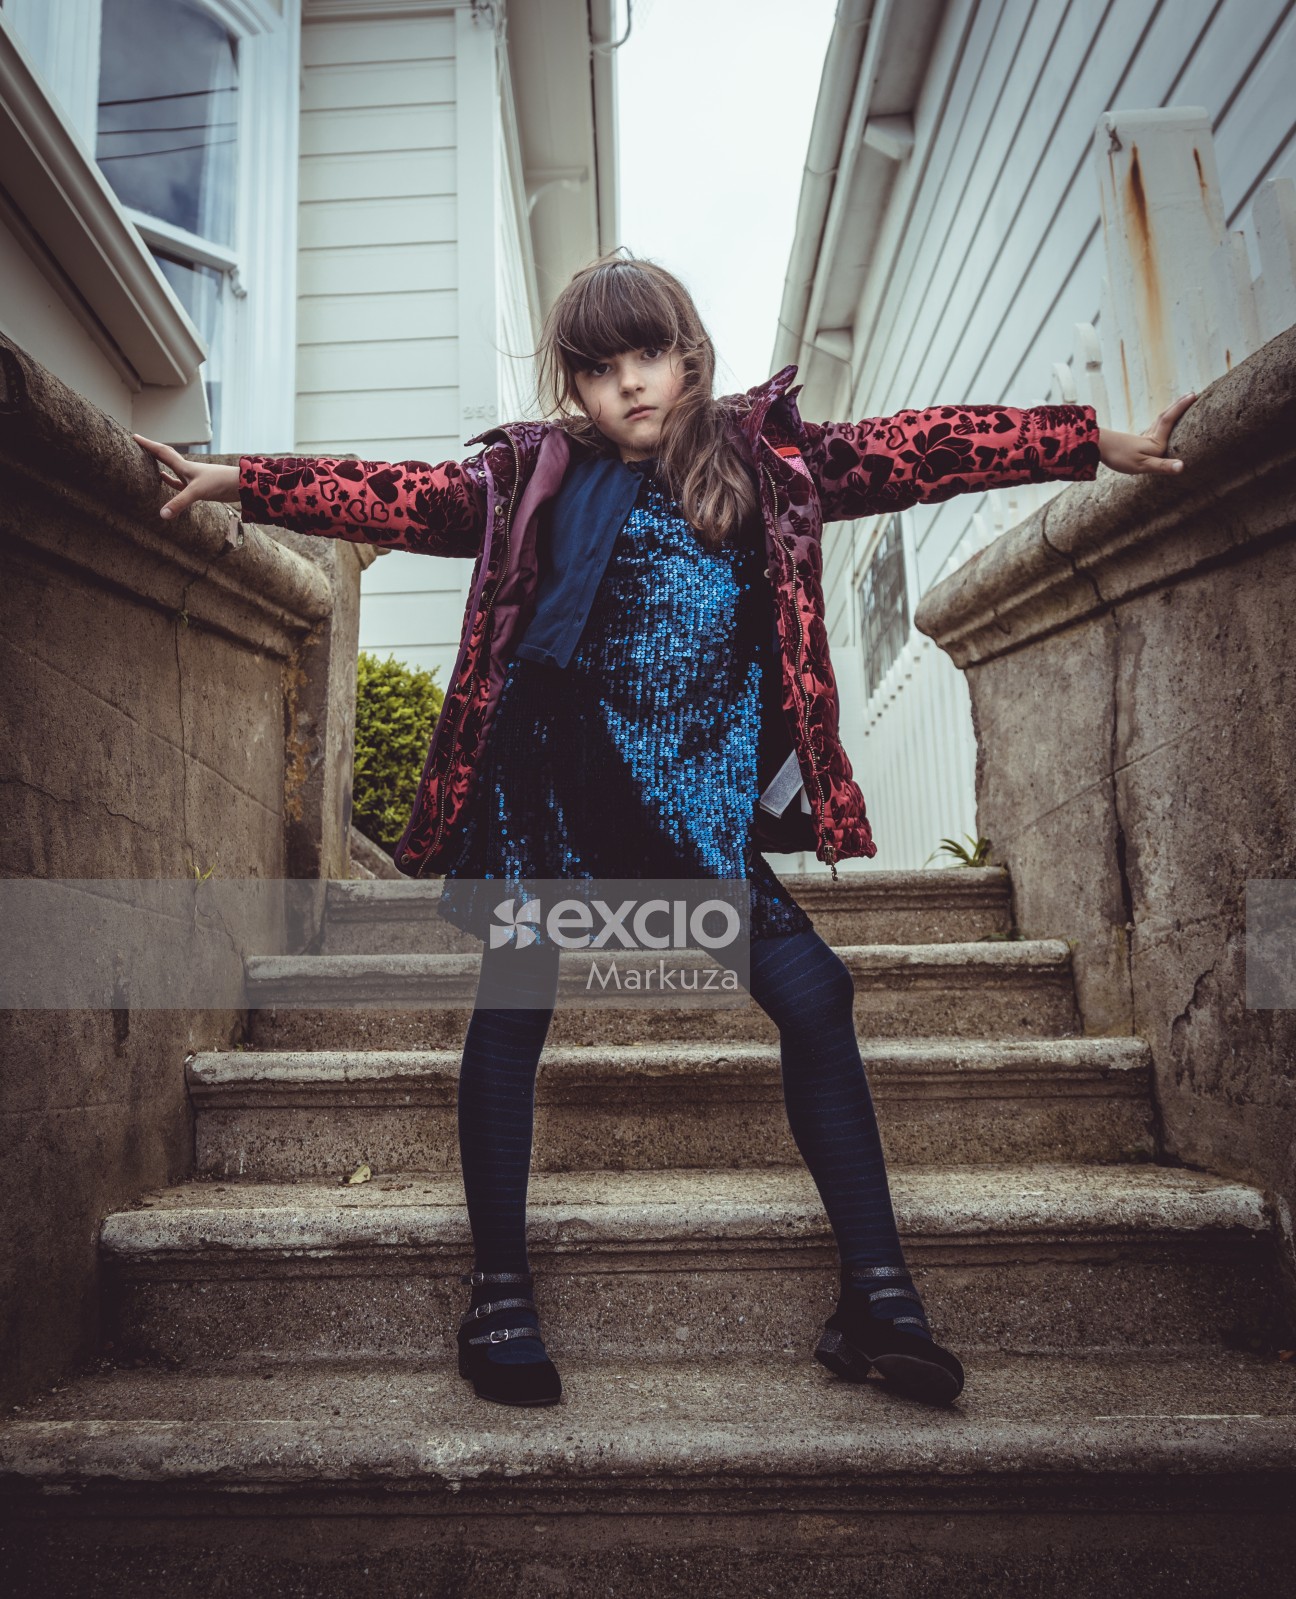 Kid fashion, the stairs are my catwalk